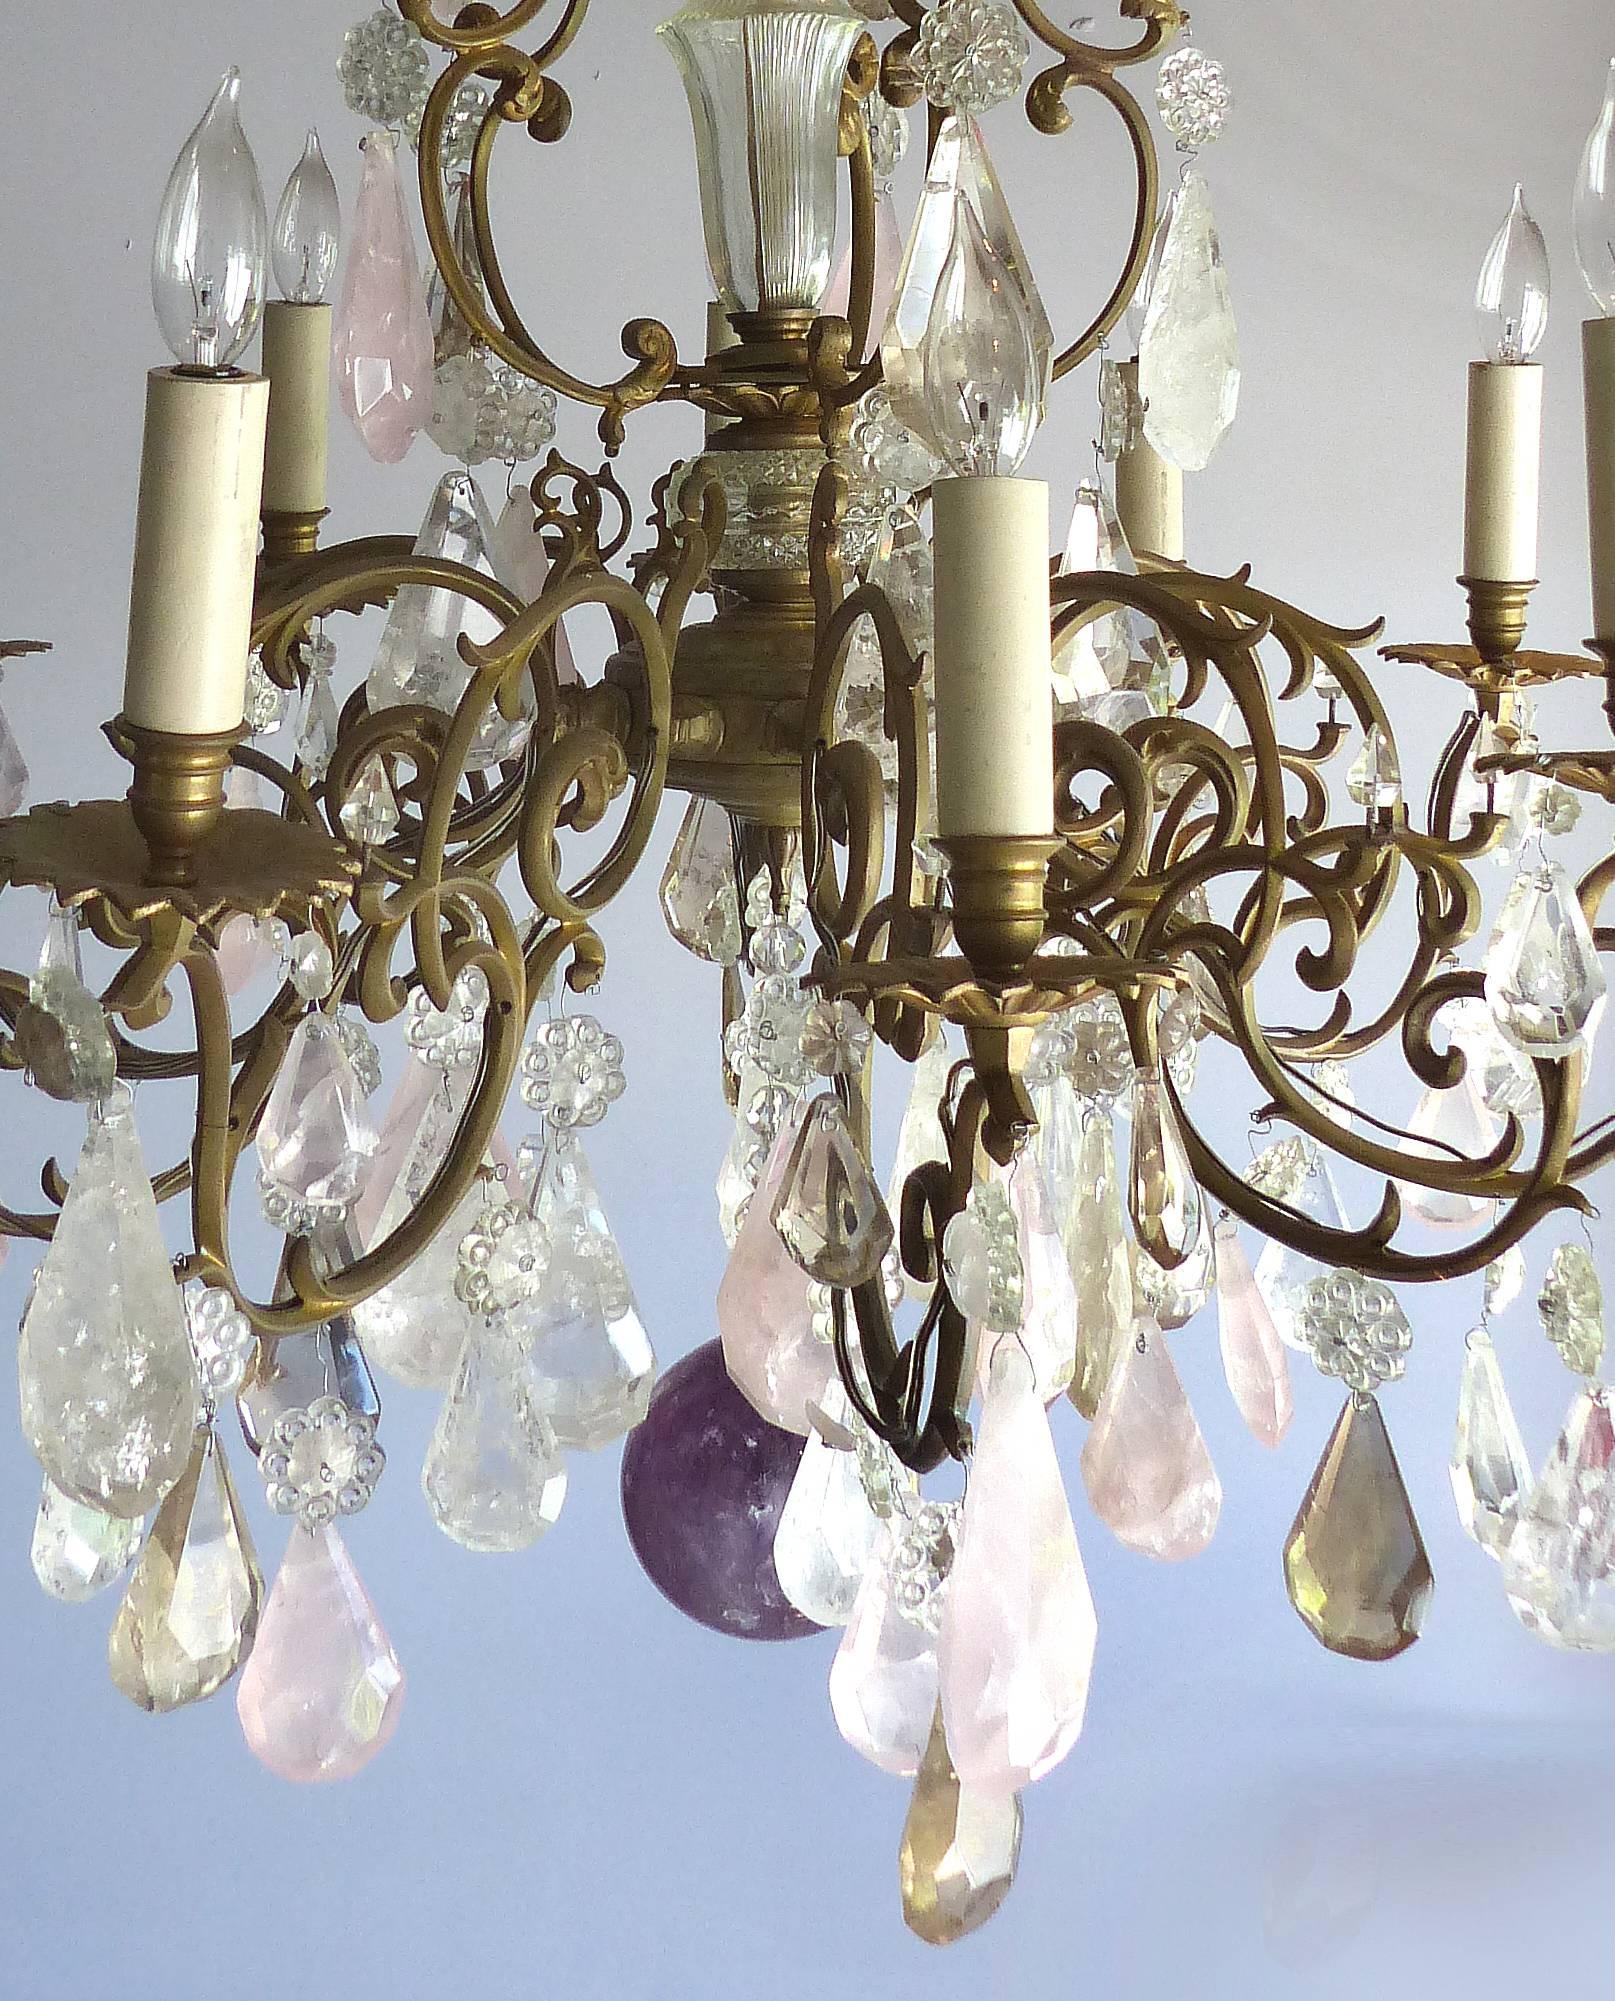 19th Century French Amethyst Quartz, Rock Crystal and Rose Quart Chandelier

Offered is a French 19th century bronze ormolu chandelier with later French wired electrification. Adorned with large amethyst quartz, clear rock crystals, amber quartz and